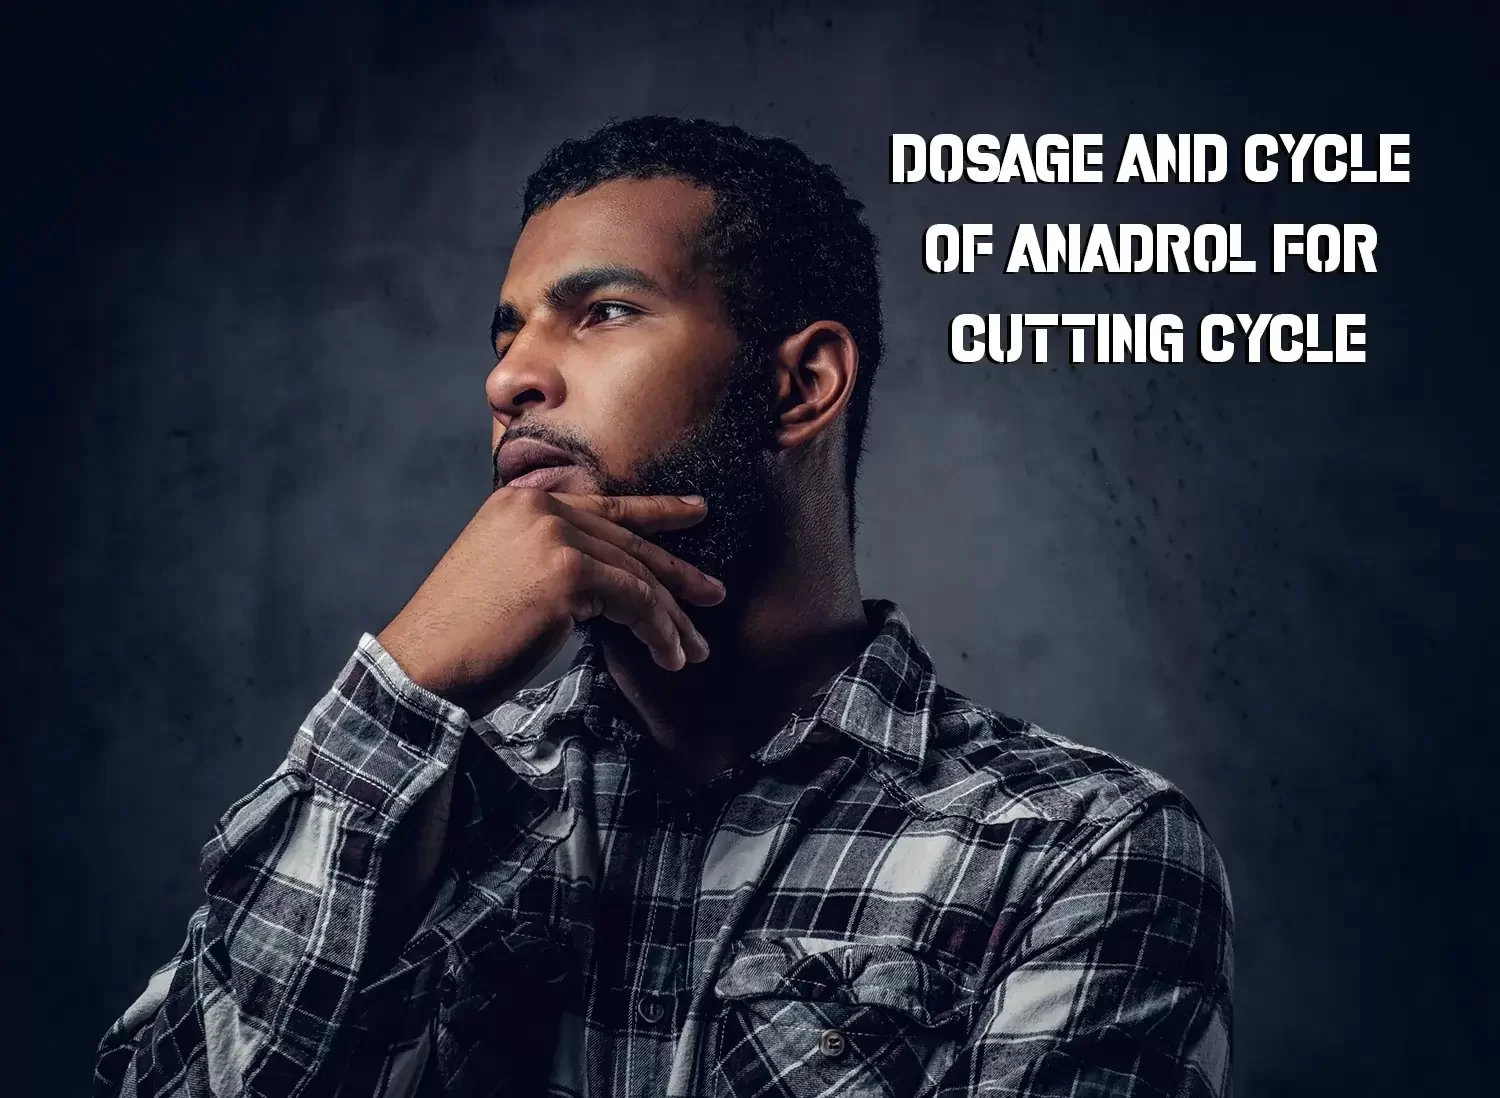 Anadrol for cutting cycle